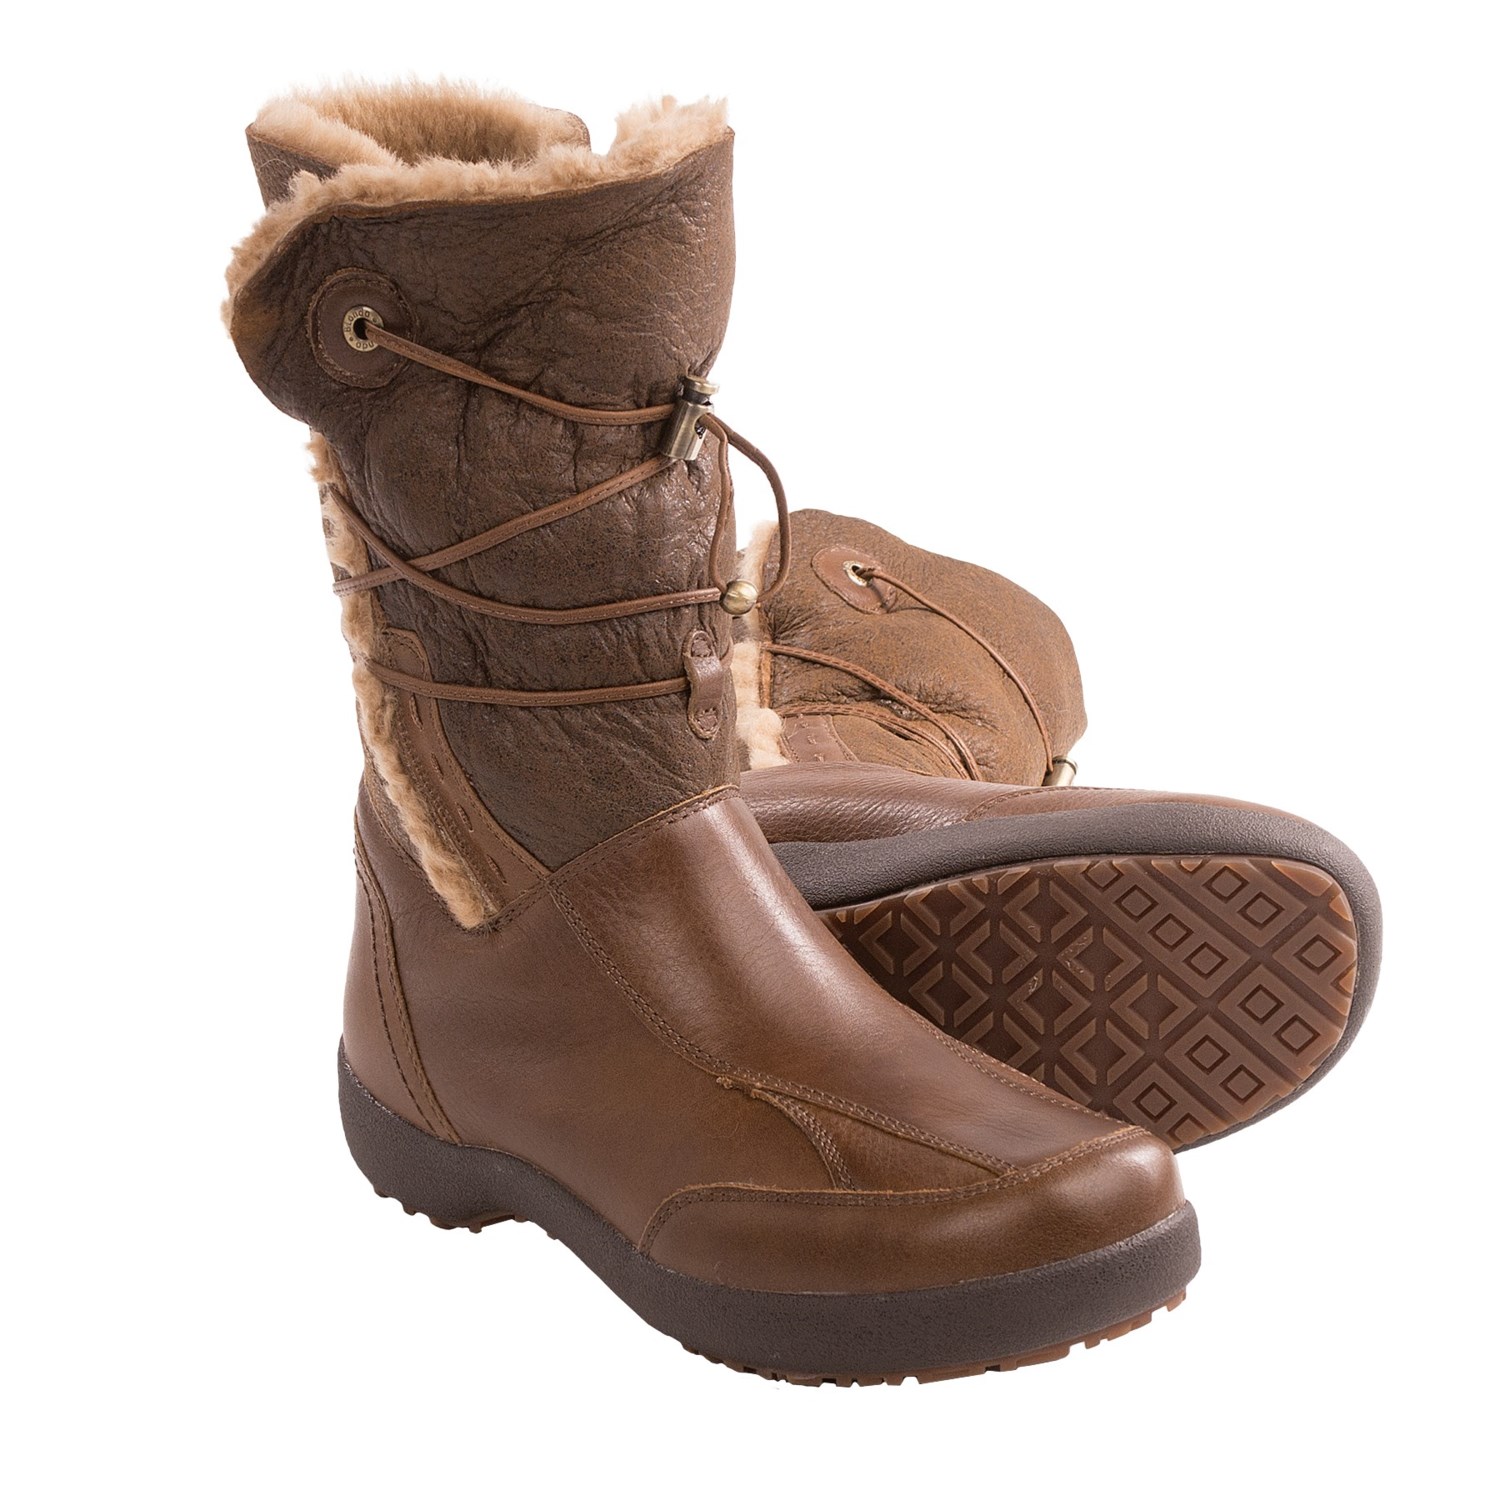 Blondo Waverly Boots (For Women) - Save 69%